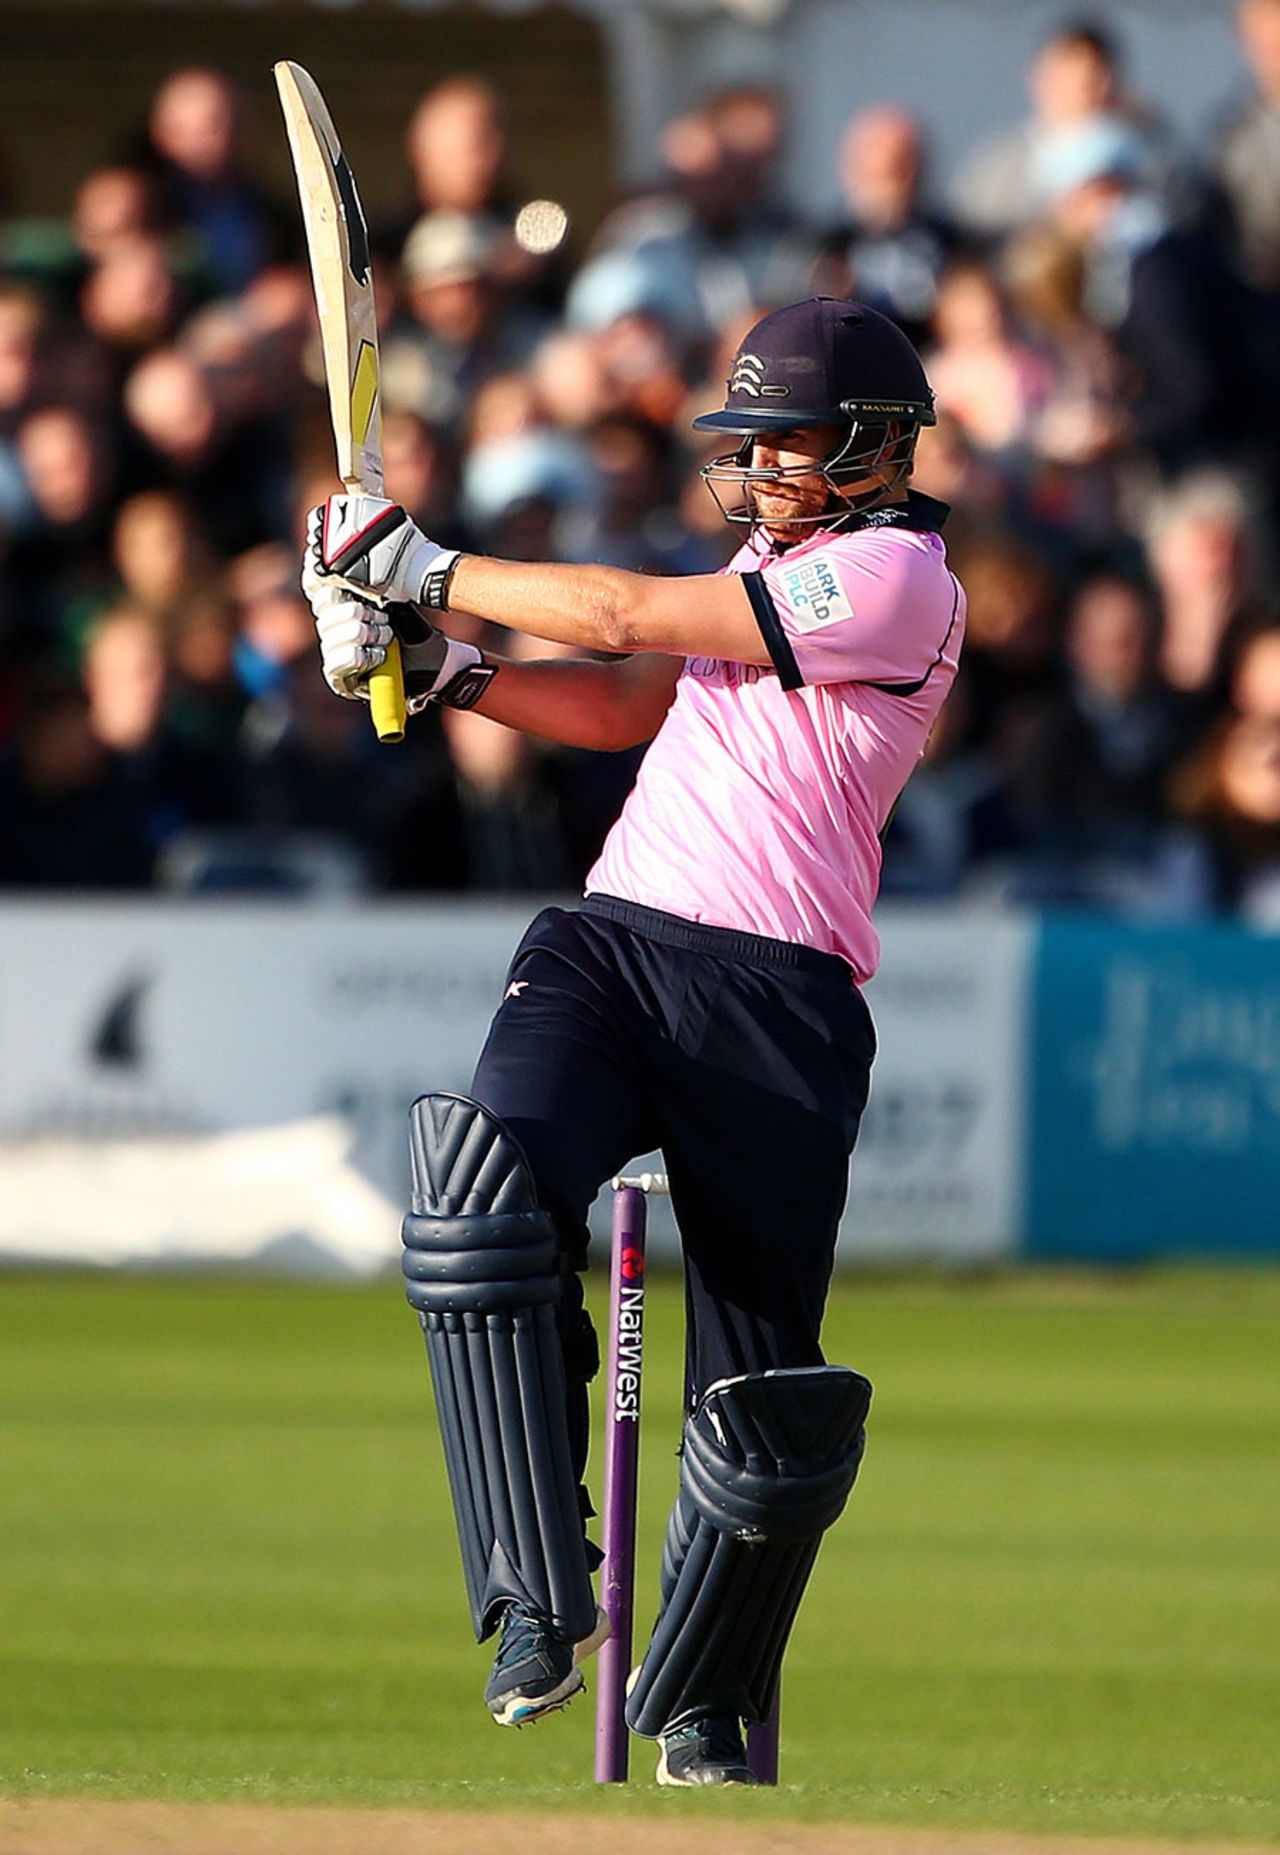 Dawid Malan plundered the Sussex bowling with 115 off 64 balls, Sussex v Middlesex, NatWest T20 Blast, South Group, Hove, May 29, 2015